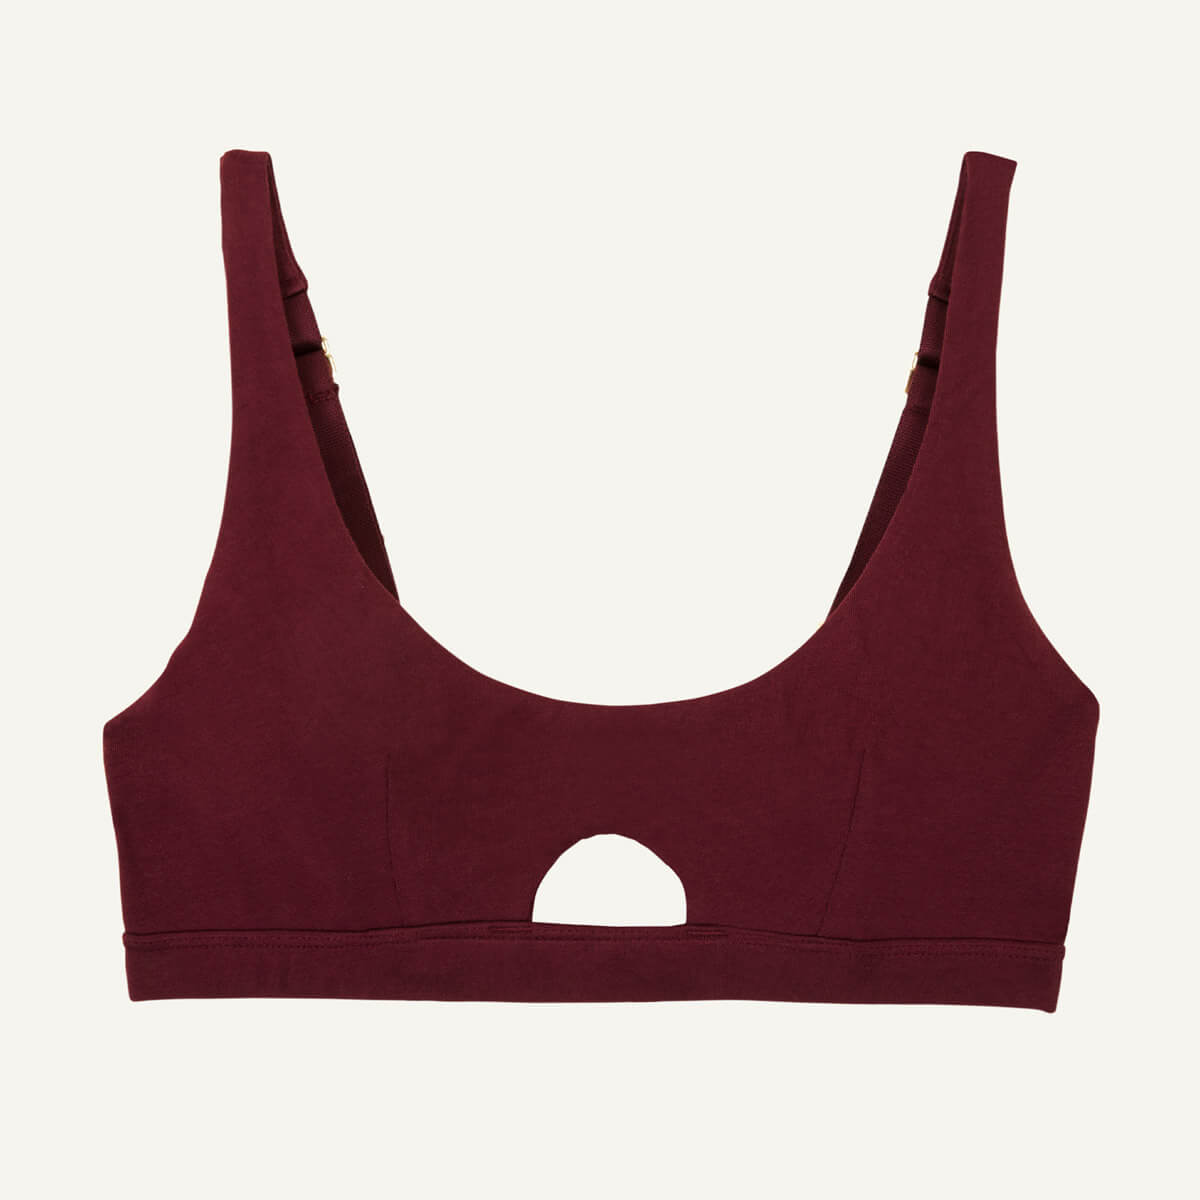 Scoop-Neck Keyhole Bralette | Anthropologie Singapore Official Site